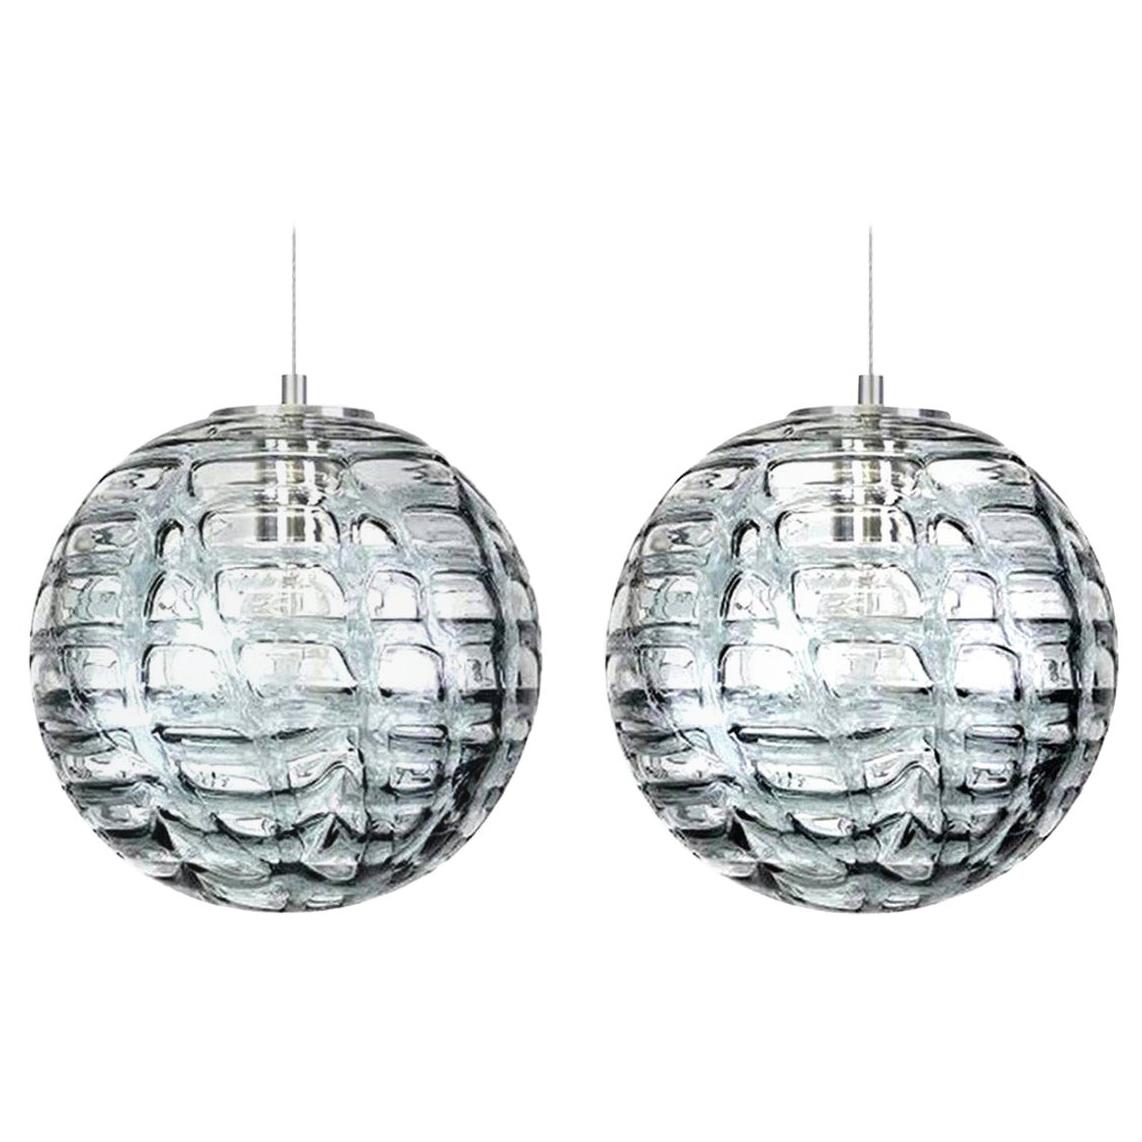 Exceptional Pair of Grey Murano High-End Glass Pendant Lights Venini Style 1960s For Sale